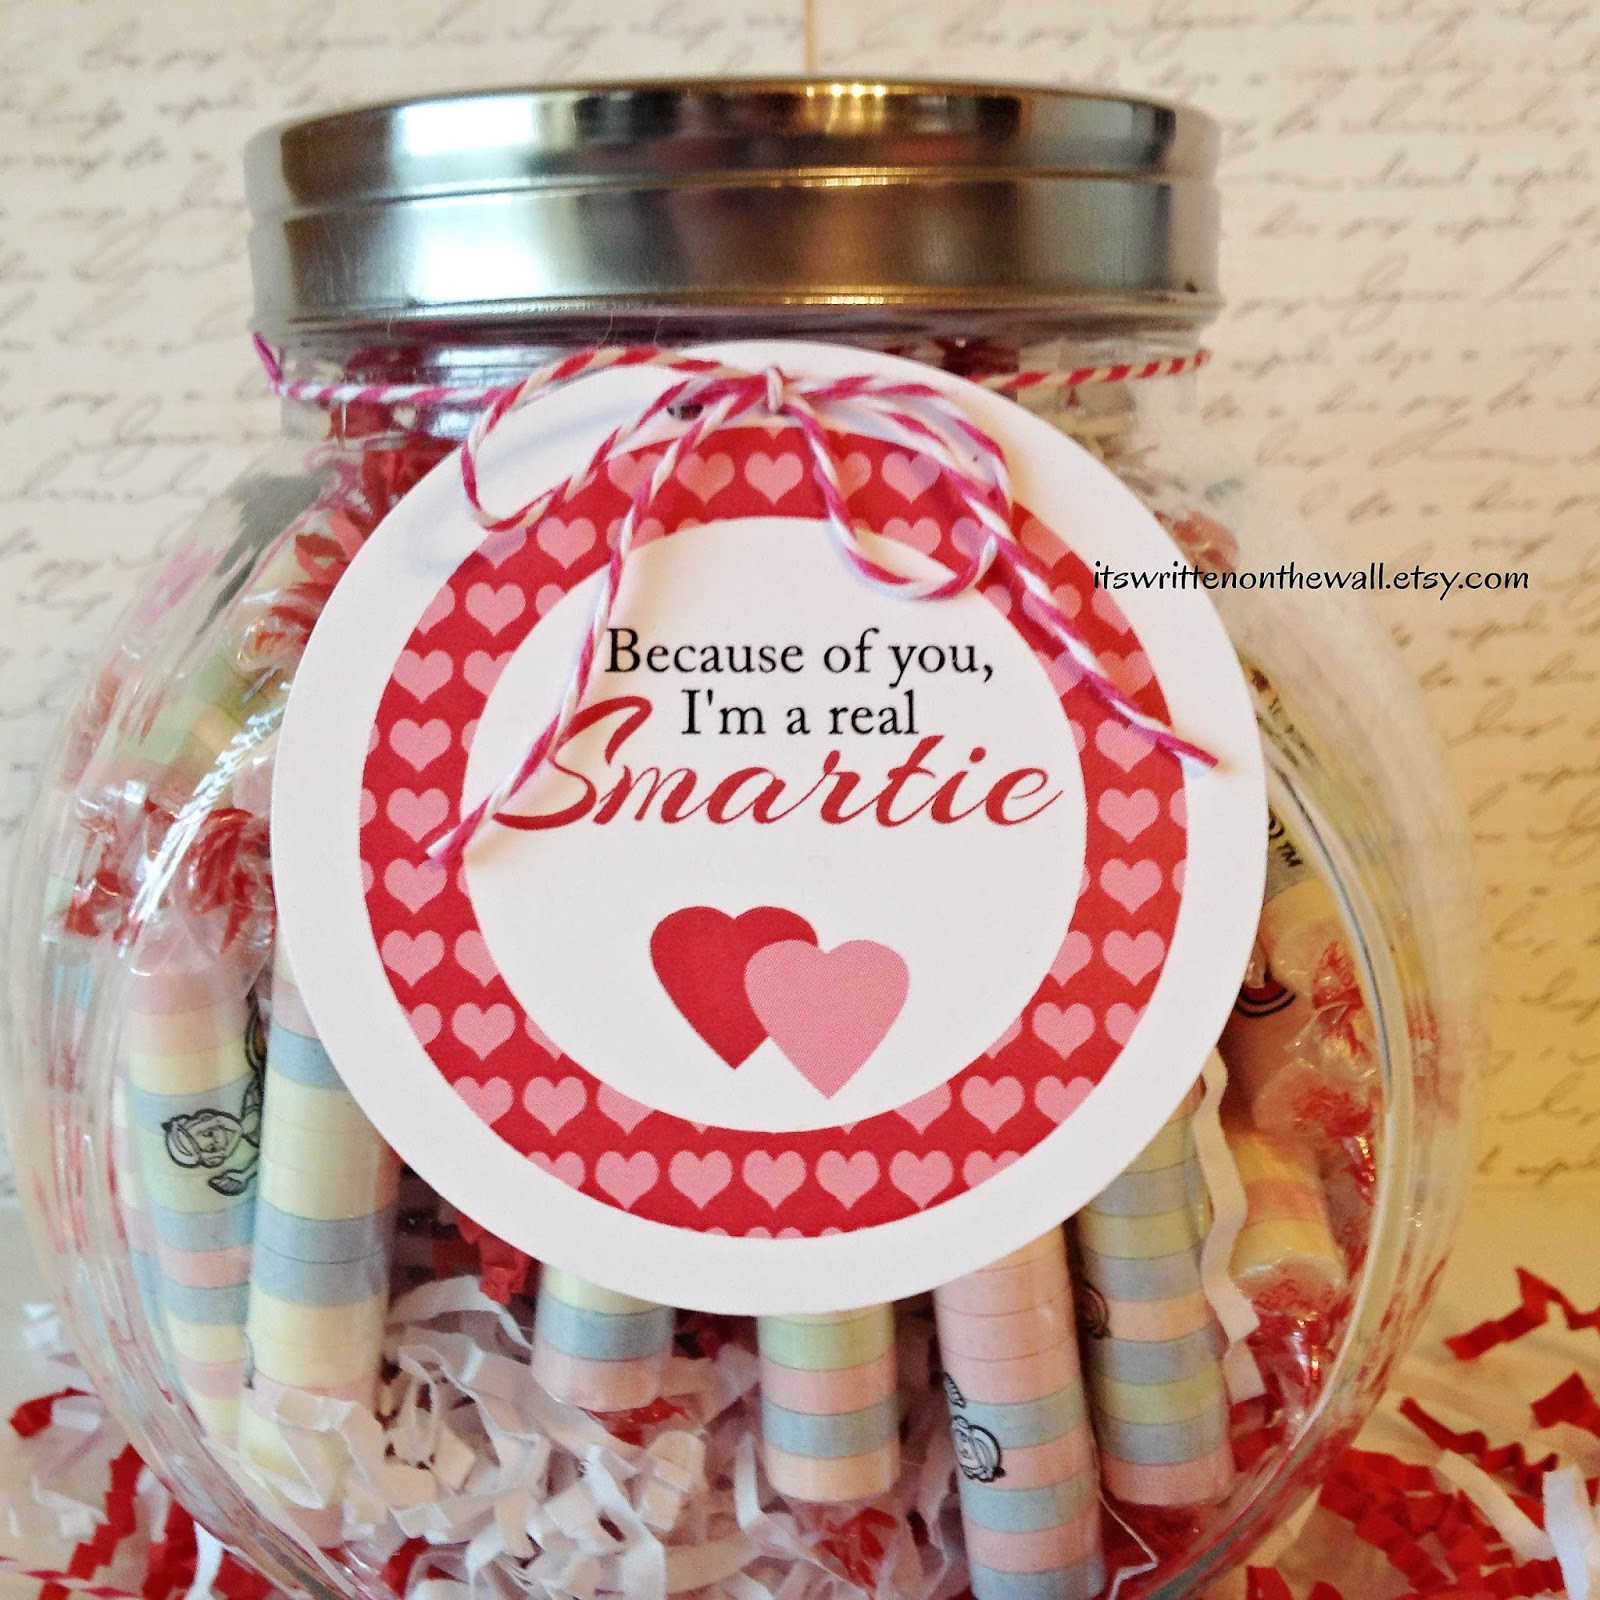 Valentines Gift Ideas For Teachers
 It s Written on the Wall "Because of you I m a Smartie